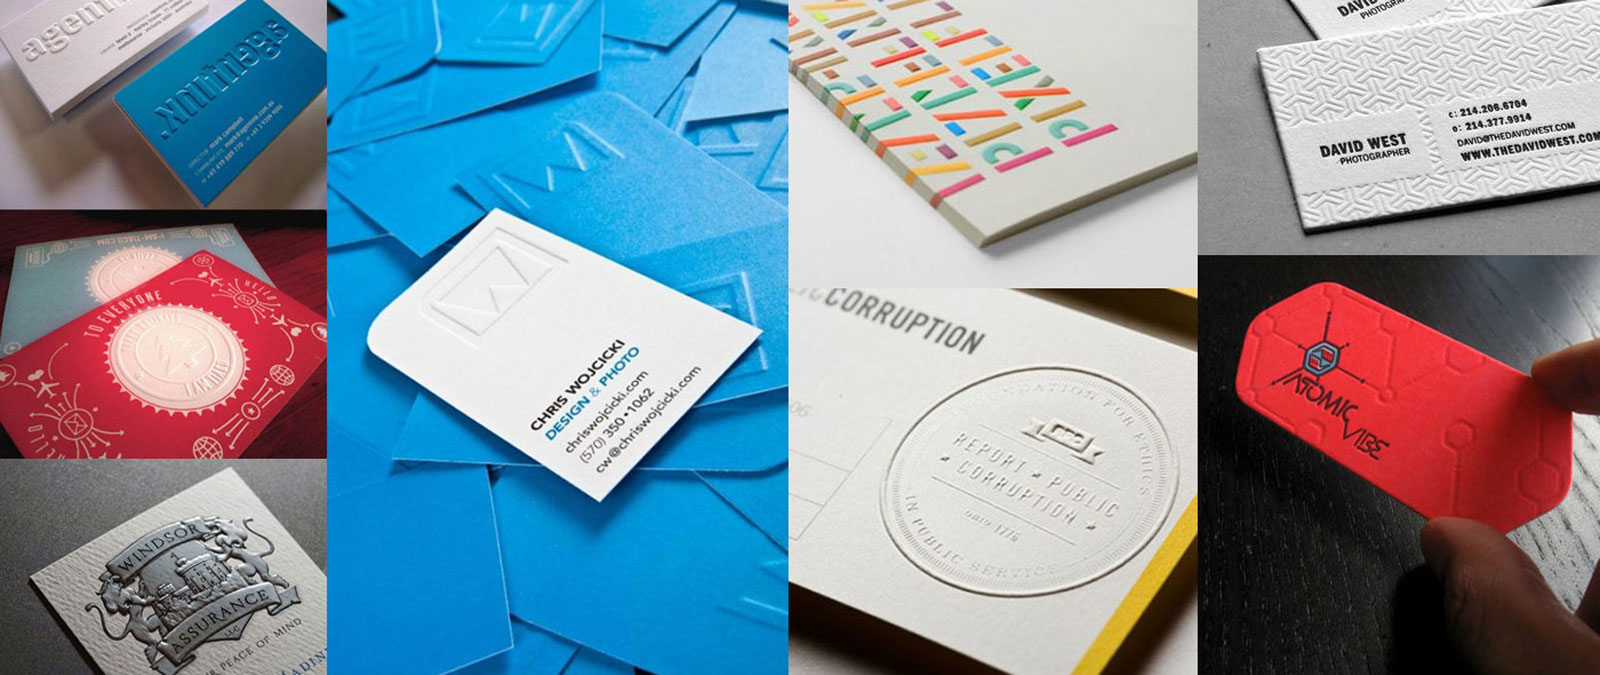 beautiful and creative embossed business card